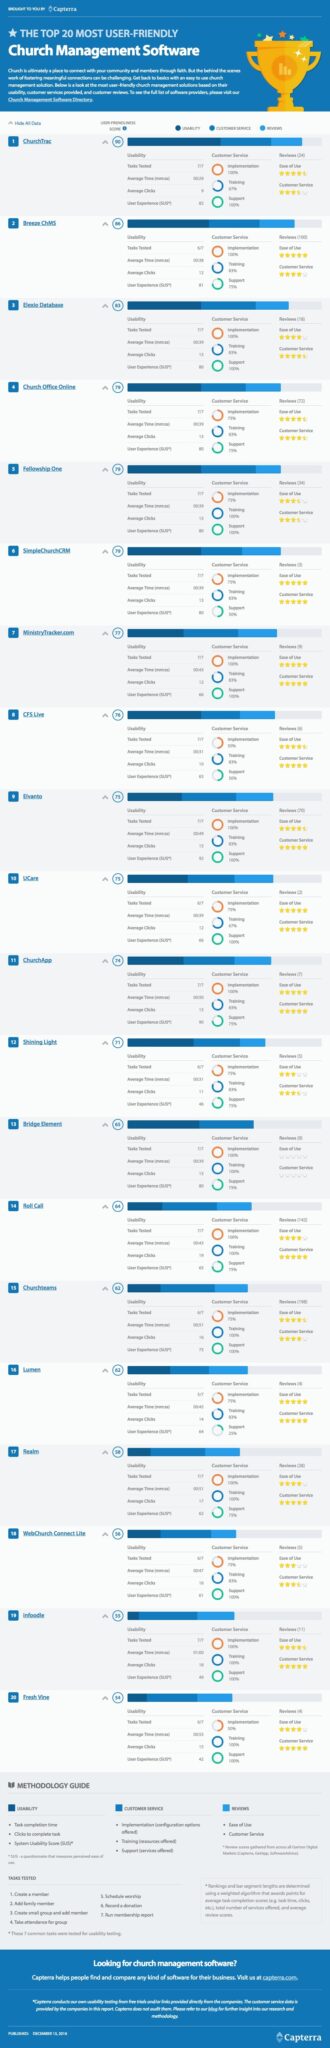 Most User-Friendly Church_Capterra Infographic